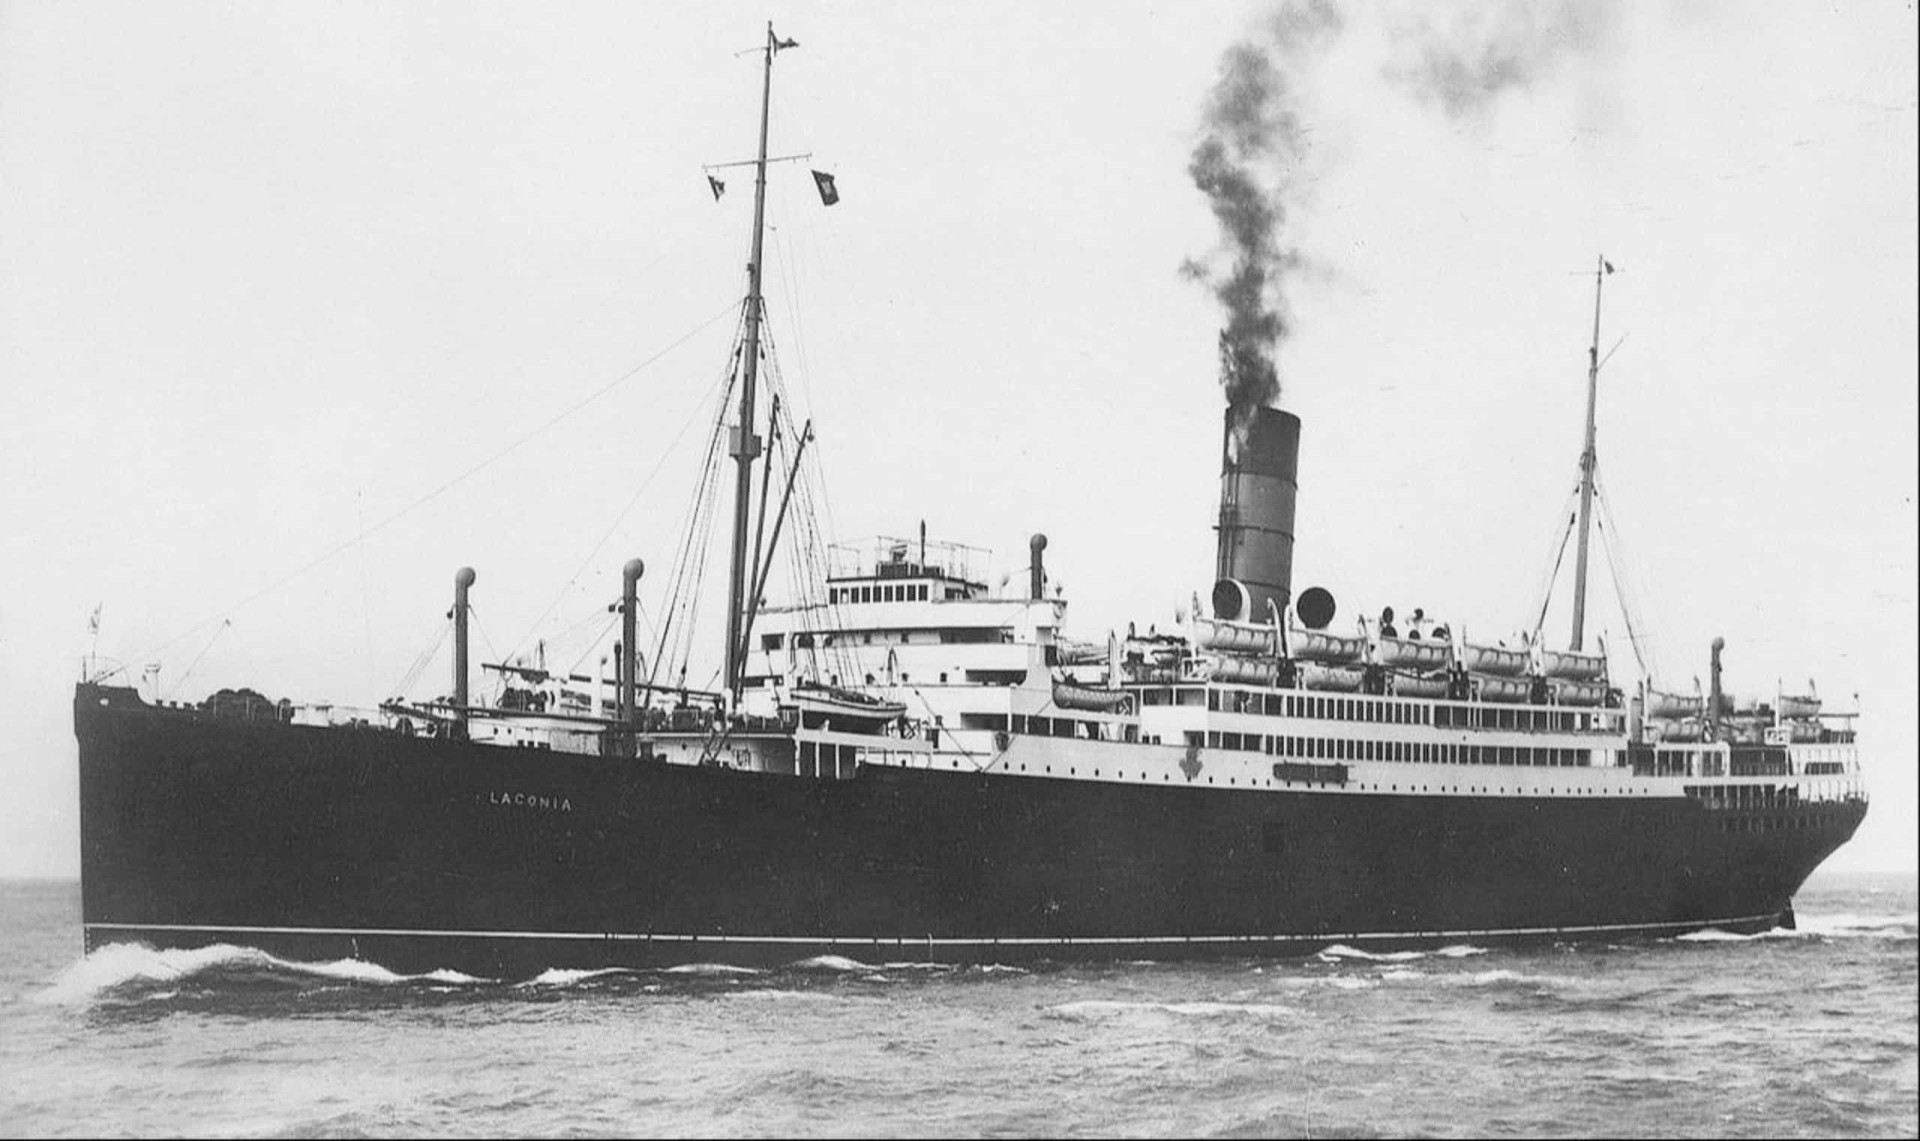 <p>In November 1922, the Cunard-operated RMS <em>Laconia</em> began an around-the-world cruise—the first continuous circumnavigation of the world by a passenger liner, a voyage later dubbed the first world cruise. It marked a triumph for the company, and a milestone in the history of the cruise industry. But 20 years later, <em>Laconia</em> would be involved in one of the most controversial events of the Second World War.</p><p>You may also like:<a href="https://www.starsinsider.com/n/418594?utm_source=msn.com&utm_medium=display&utm_campaign=referral_description&utm_content=502910v1en-ae"> Celebs who've donated to the Australian bushfire relief efforts</a></p>